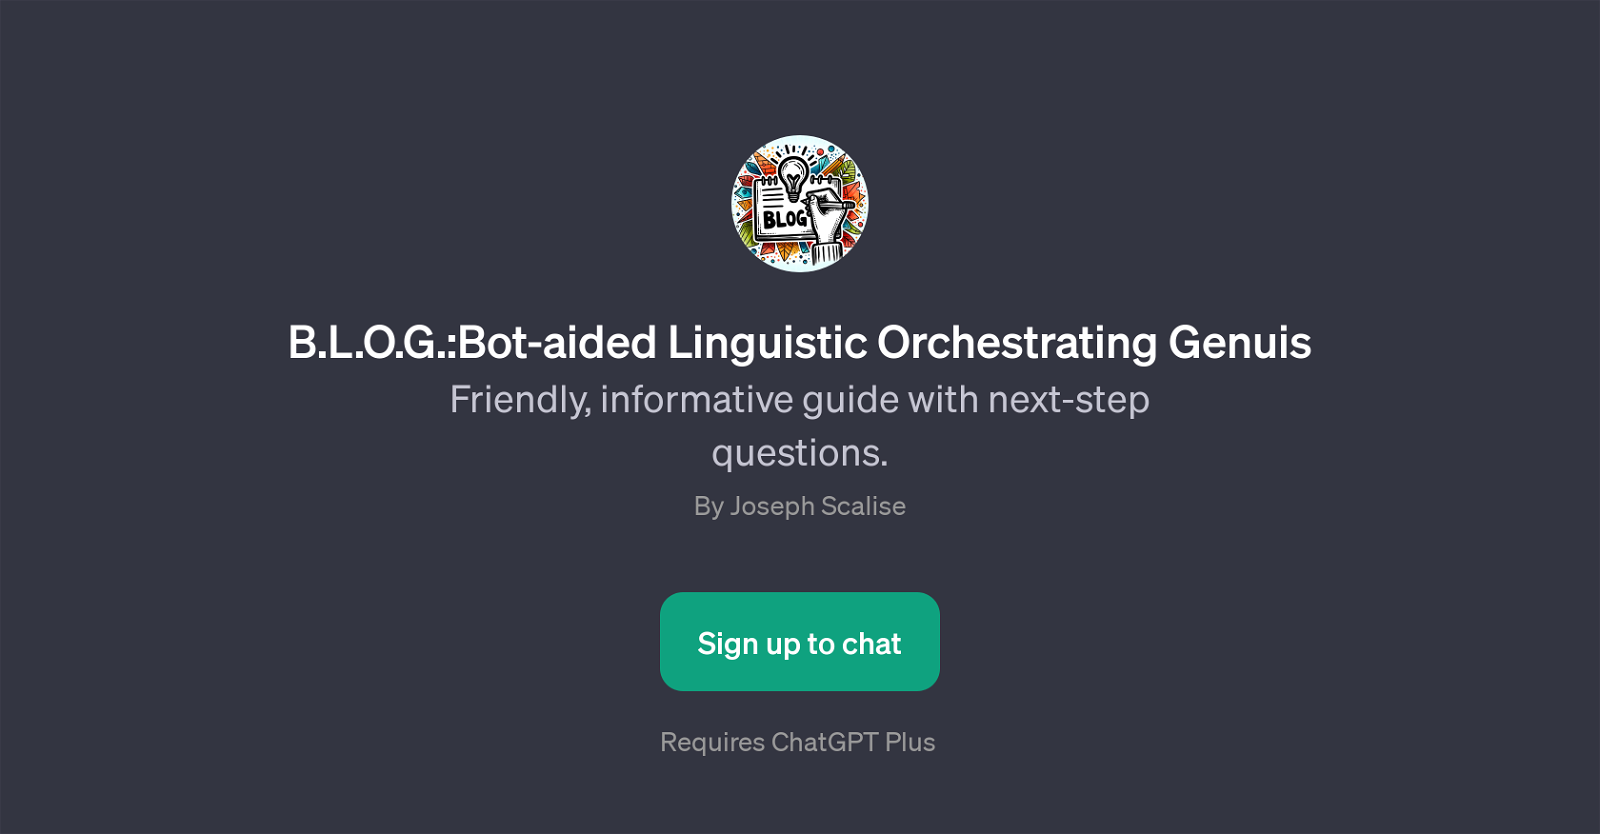 B.L.O.G.:Bot-aided Linguistic Orchestrating Genuis website